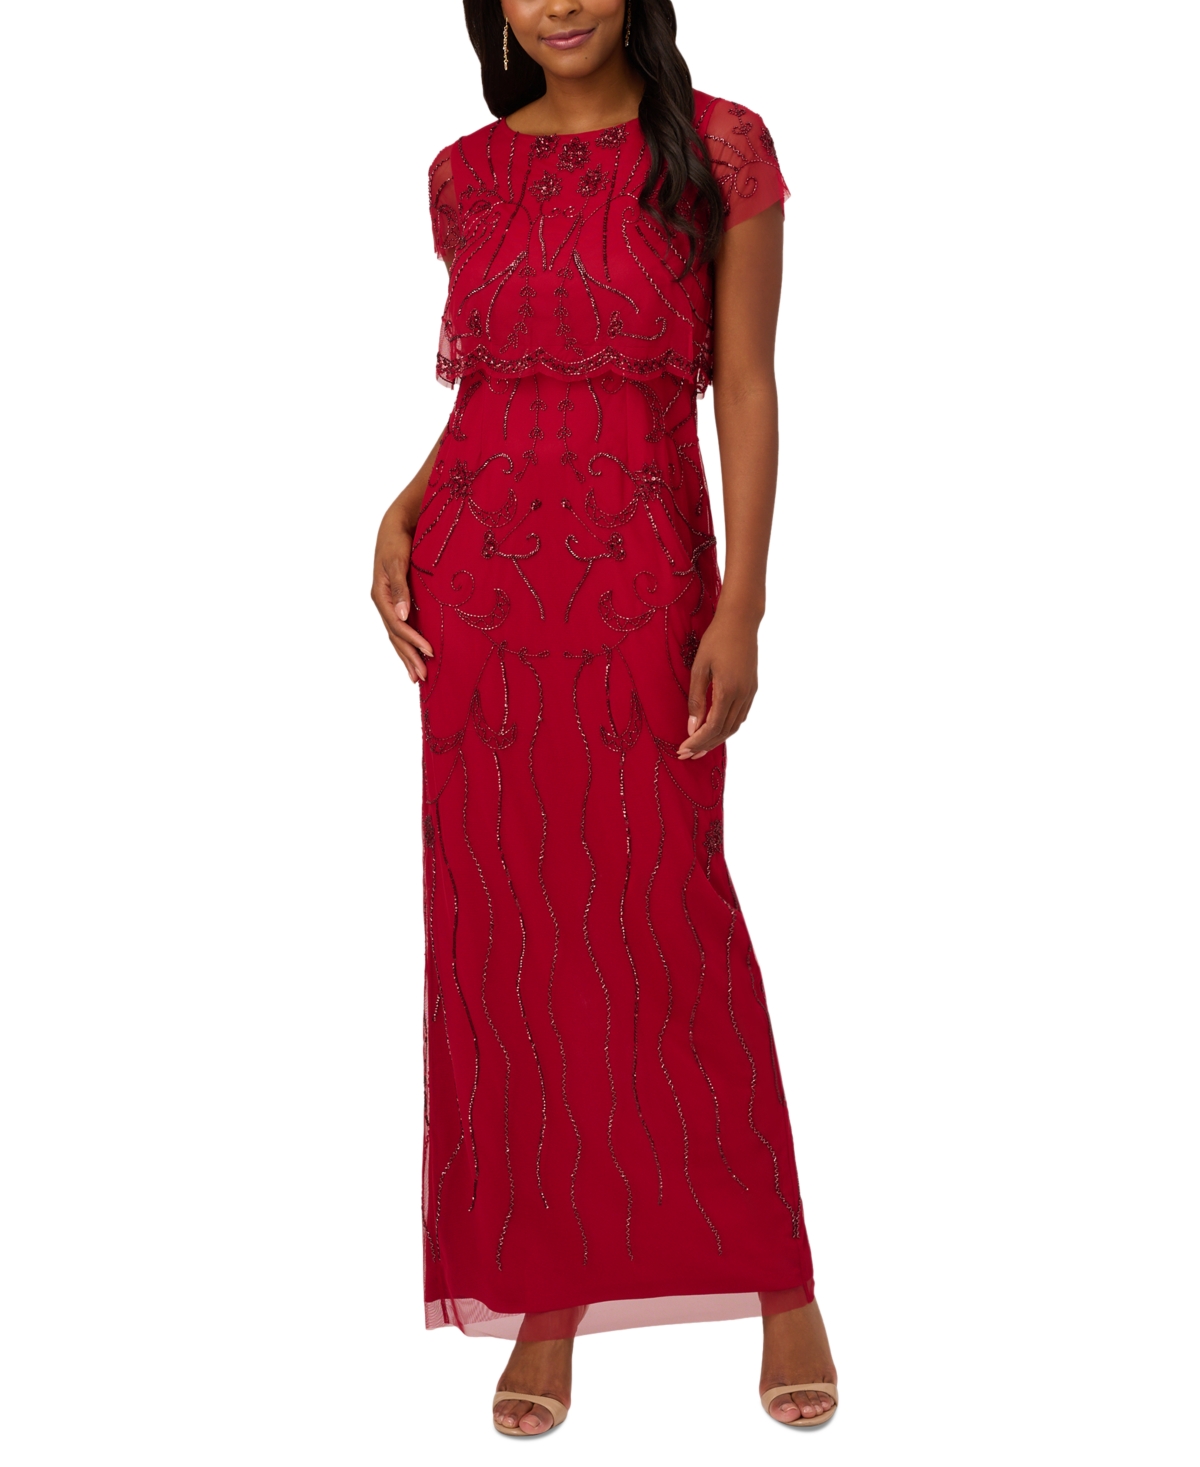 1920s Downton Abbey Dresses Adrianna Papell Petite Beaded Scalloped-Popover Gown - Cranberry $229.00 AT vintagedancer.com